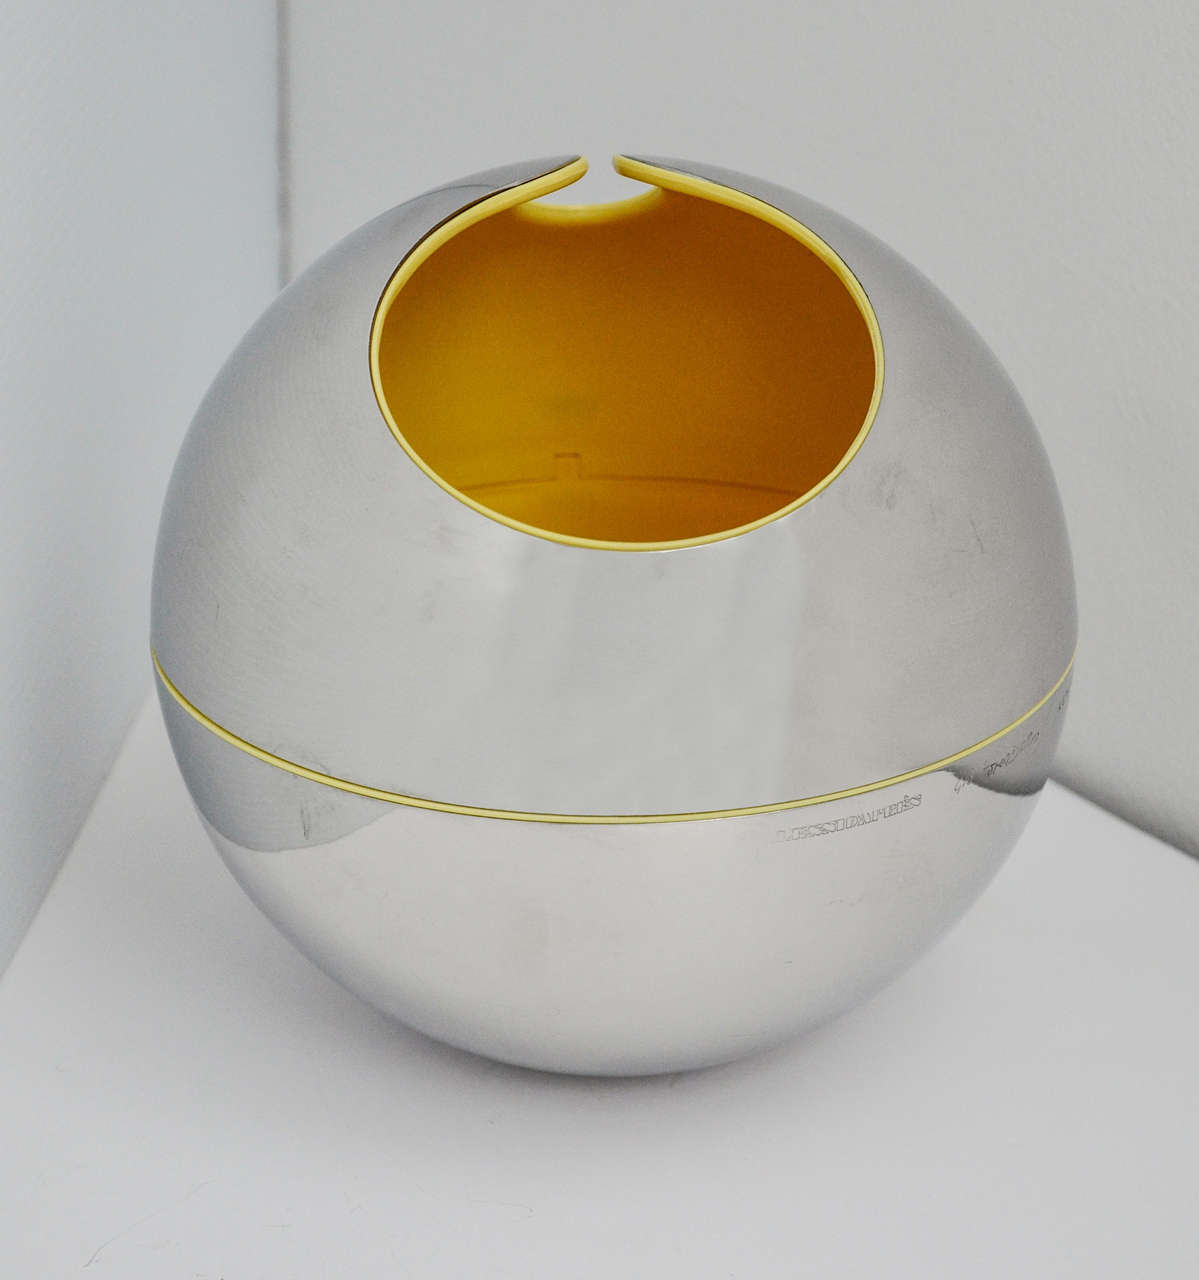 A stainless steel sphere with a yellow plastic interior designed by Gio Pomodoro for Alessi in 1972. Along with his brother Arnaldo
Pomodoro, Gio (1930-2002) was a highly regarded Italian avant-garde sculptor. Both also were acclaimed jewelry